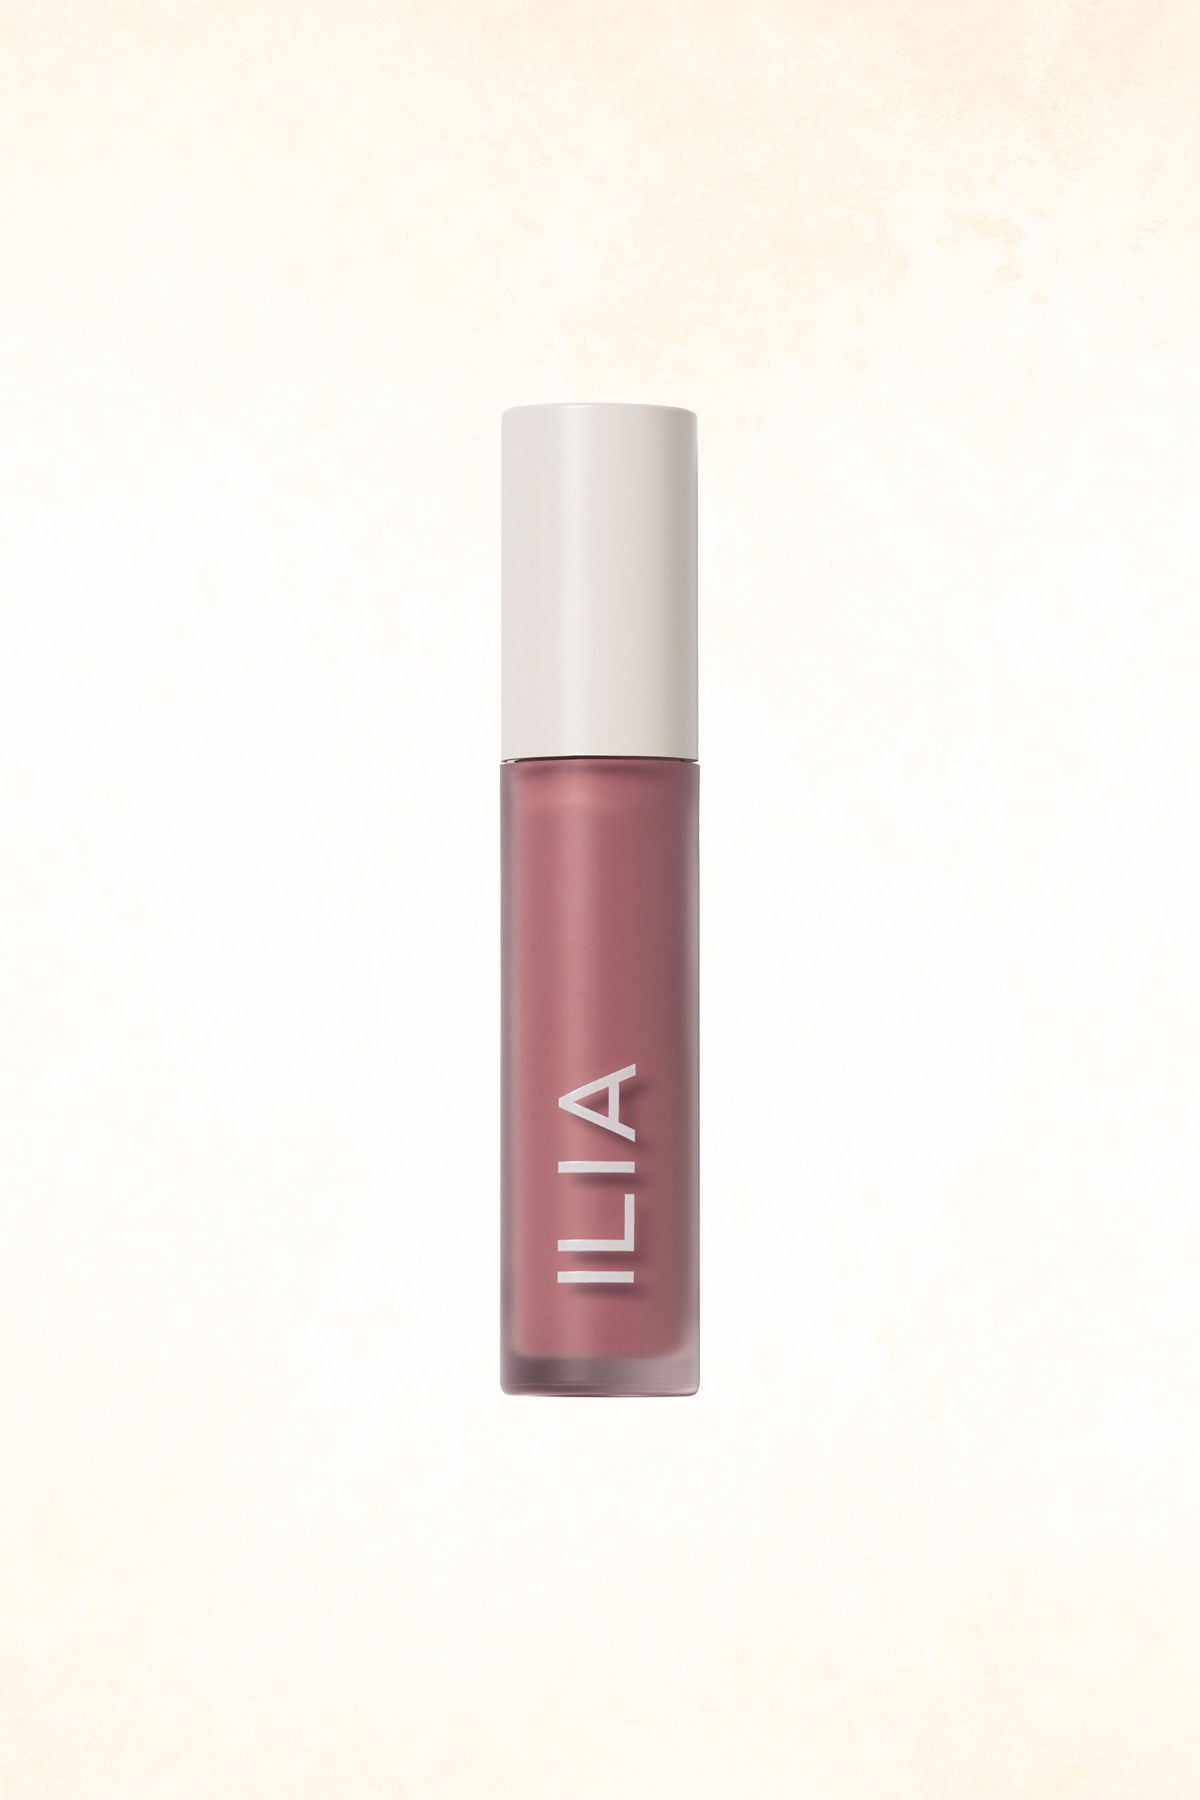 ILIA – Maybe Violet – Balmy Gloss Tinted Lip Oil